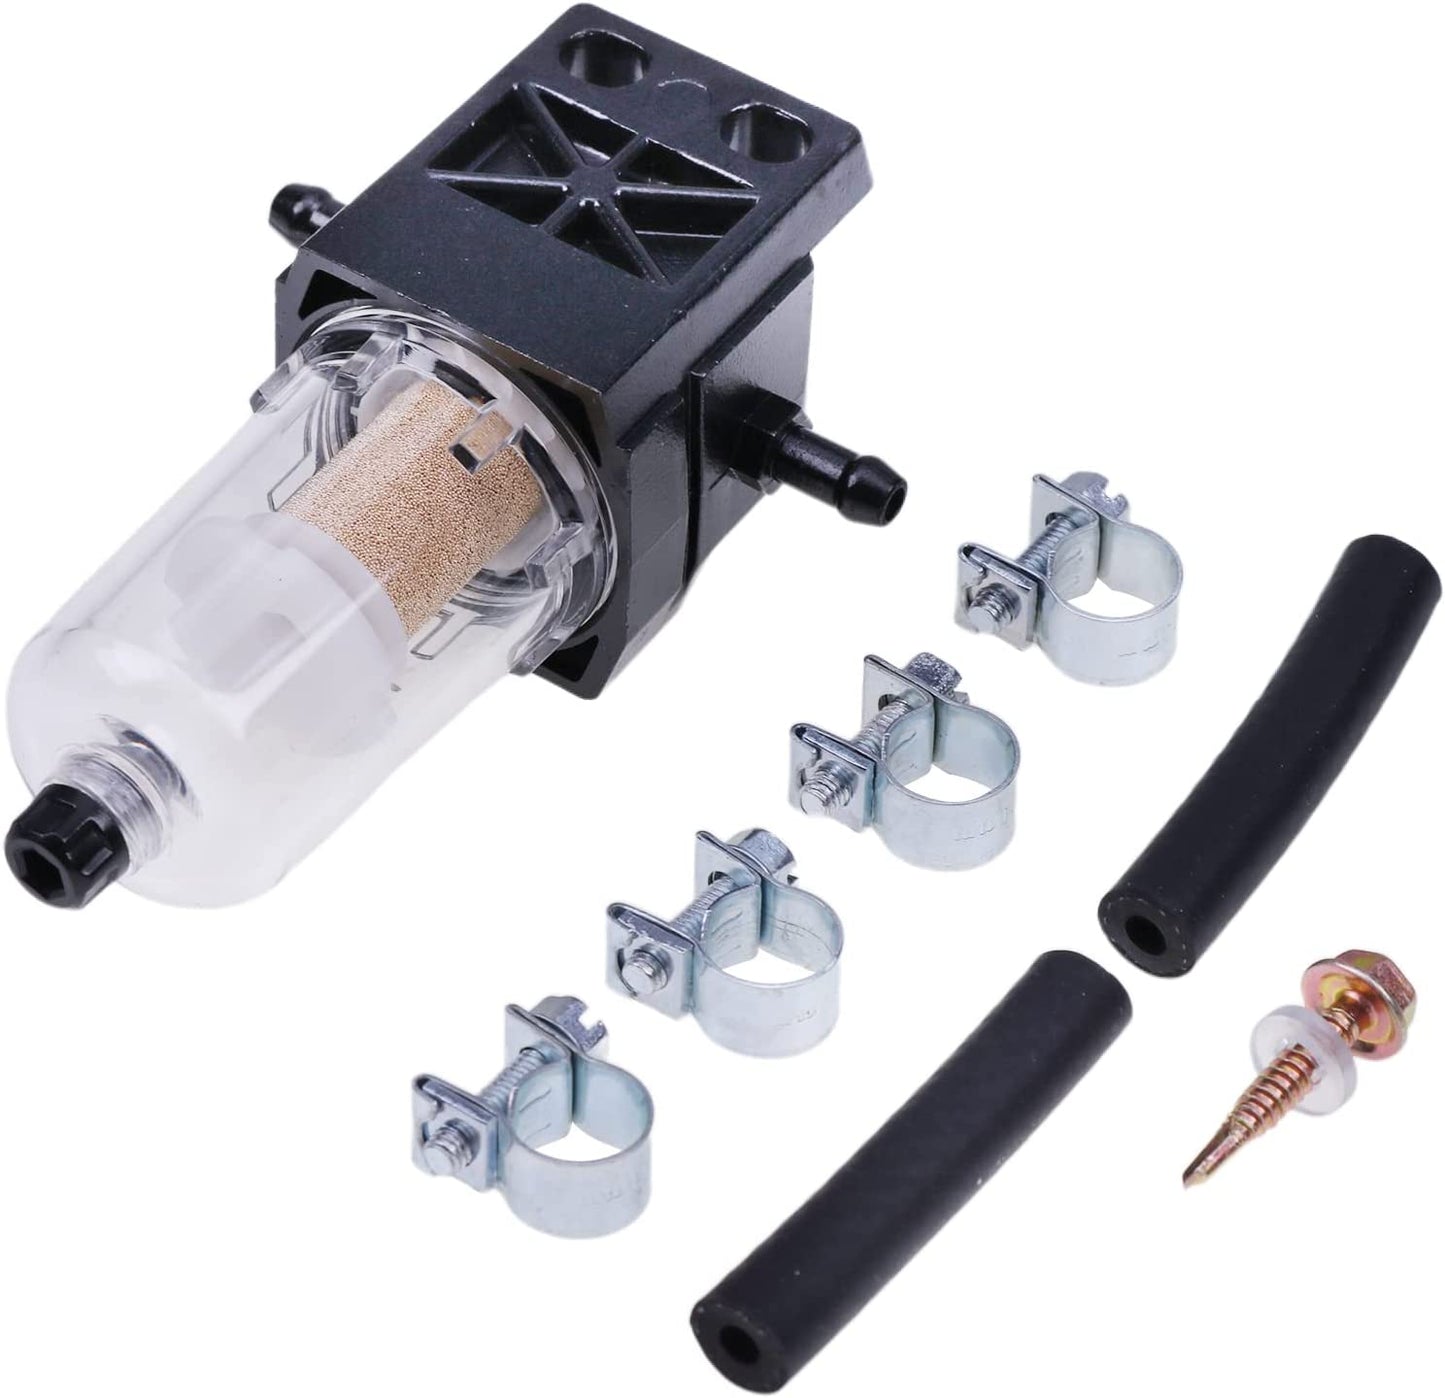 New Fuel Water Separator Assy Bronze Fuel Filter Element Kit 6mm Outlet and Inlet with Hoses and Clamps Compatible with Webasto Eberspacher Diesel Parking Heaters